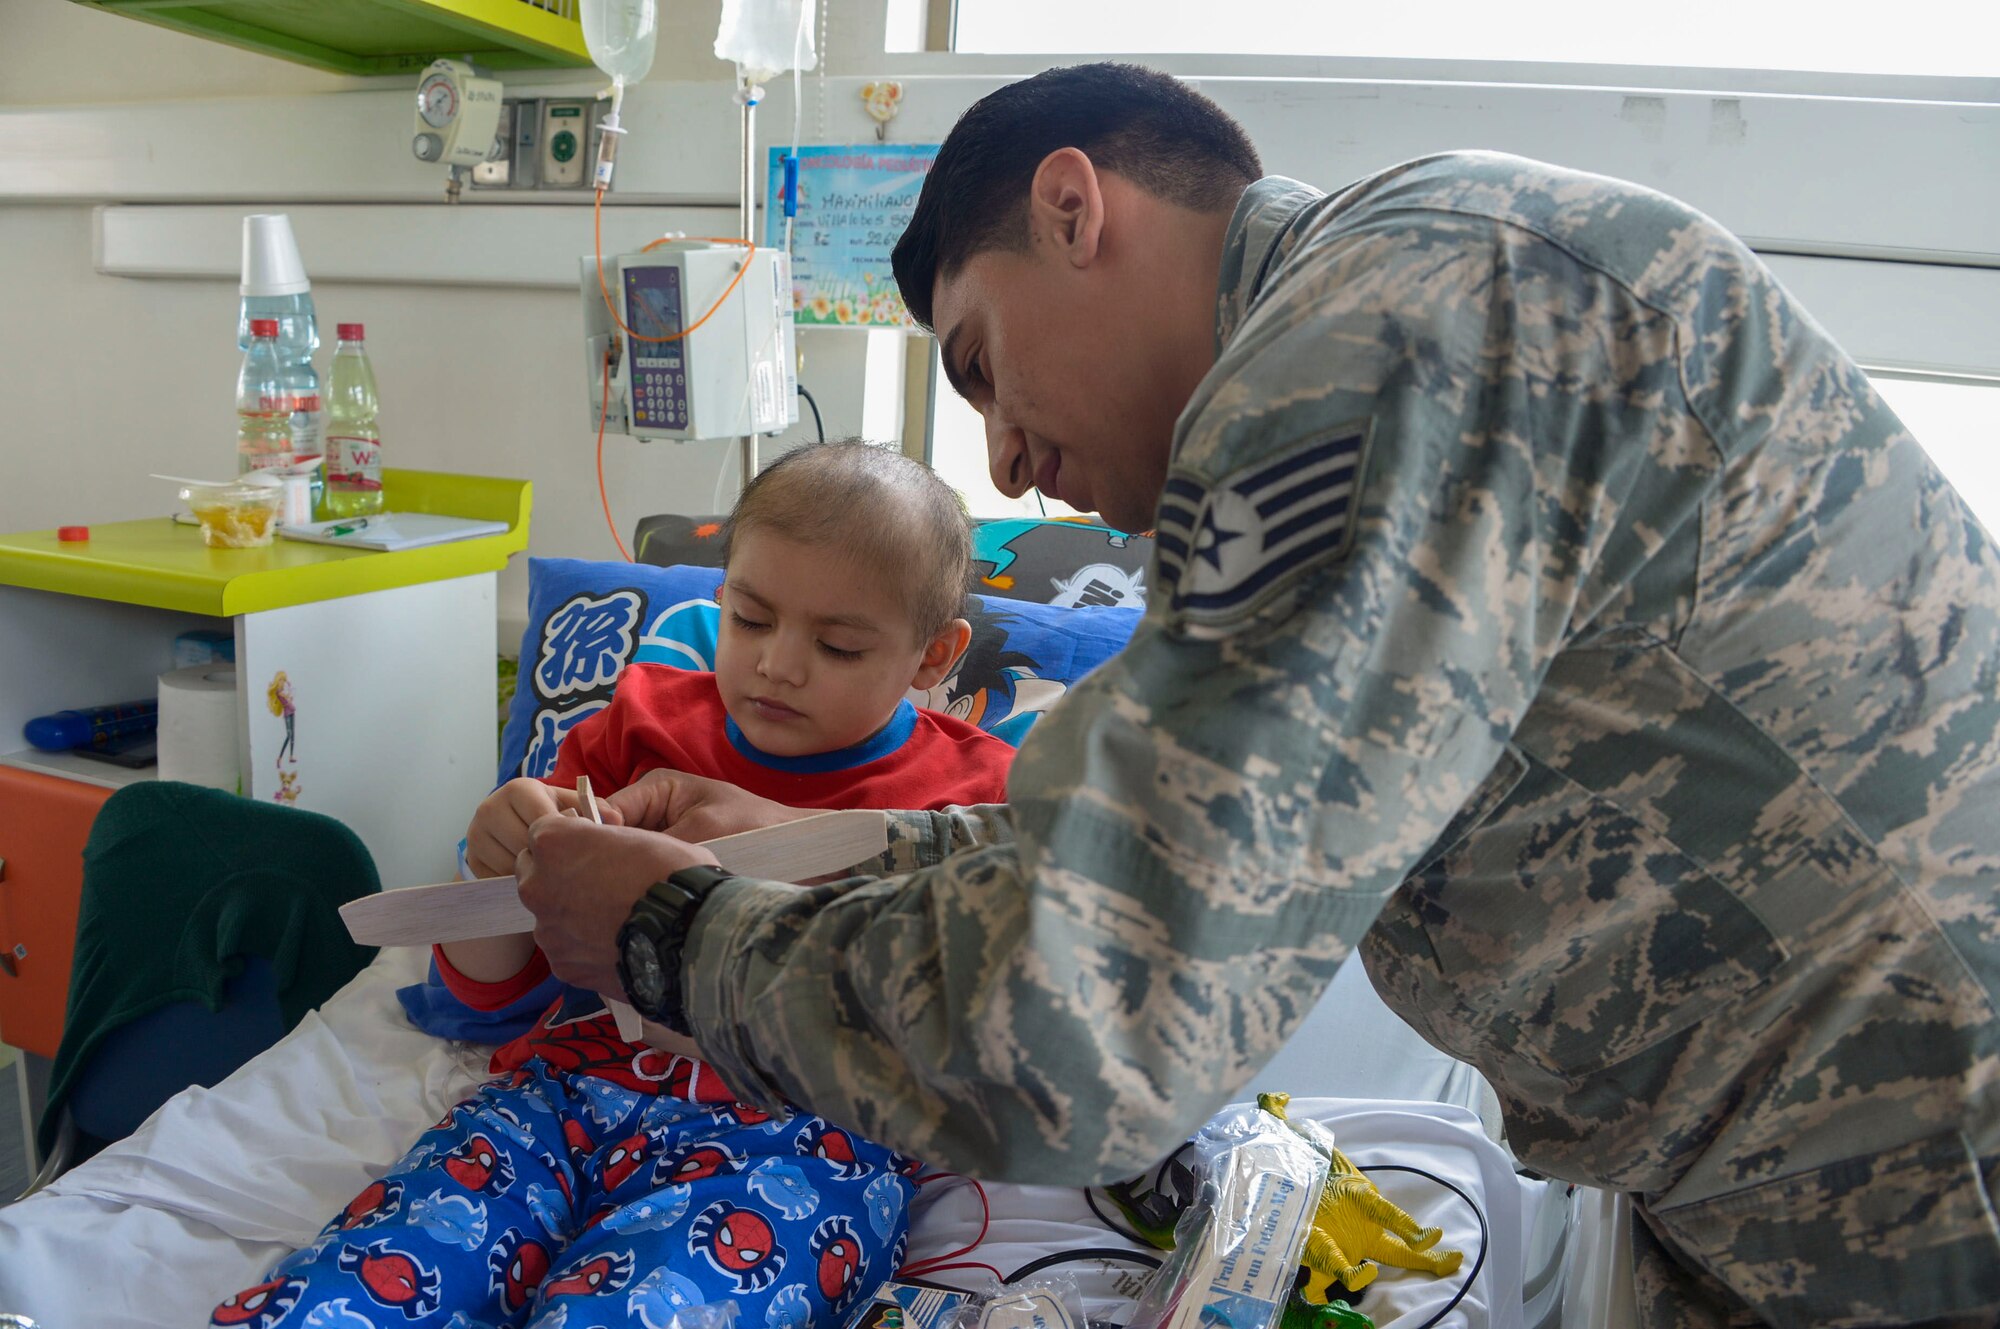 Staff Sgt. Juan Gomez-Navarro, fuel systems specialist with the F-22 Demonstration Team, helps a child build a plane at San Juan de Dios hospital in Santiago, Chile, March 31, 2016.  The Airmen are in Chile to participate in the 2016 FIDAE Air and Space Trade Show and spent some of their down-time visiting children in multiple hospitals.  (U.S. Air Force photo by Tech. Sgt. Heather Redman/Released)